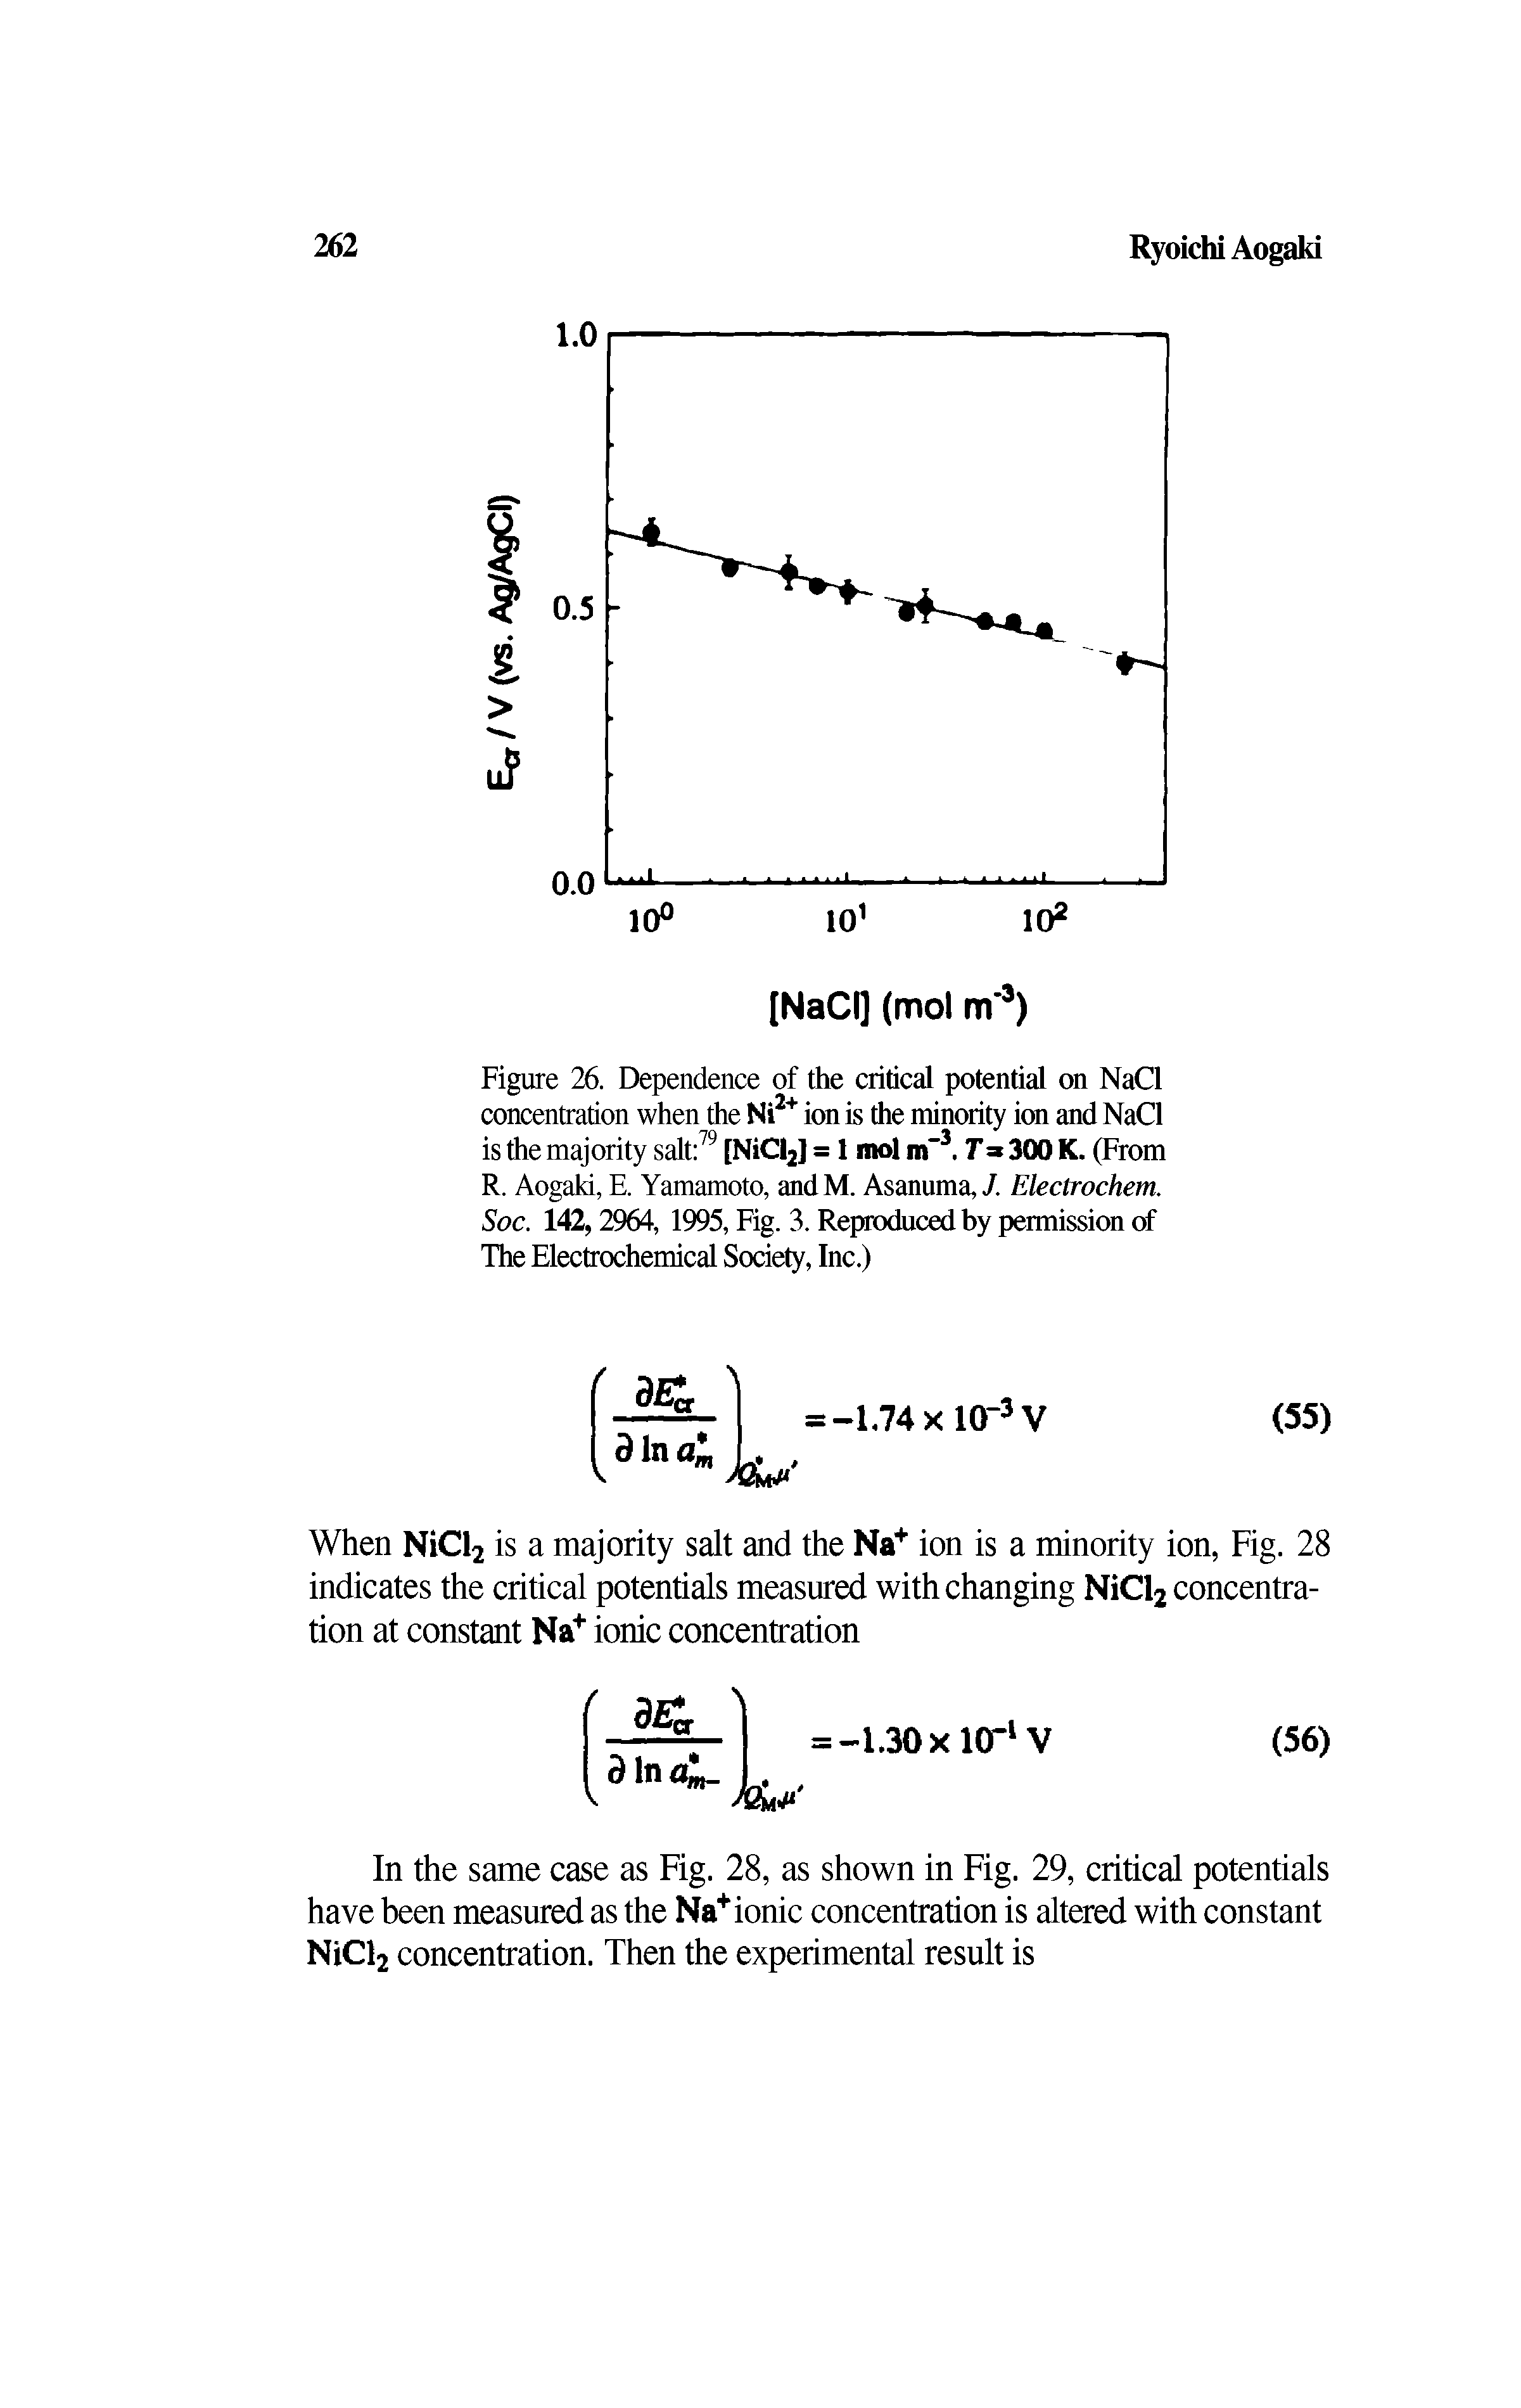 Figure 26. Dependence of the critical potential on NaCl concentration when the Ni2+ ion is the minority ion and NaCl is the majority salt 79 [NiCl2J = 1 mol nf3. T = 300 K. (From R. Aogaki, E. Yamamoto, andM. Asanuma, J. Electrochem. Soc. 142,2964, 1995, Fig. 3. Reproduced by permission of The Electrochemical Society, Inc.)...